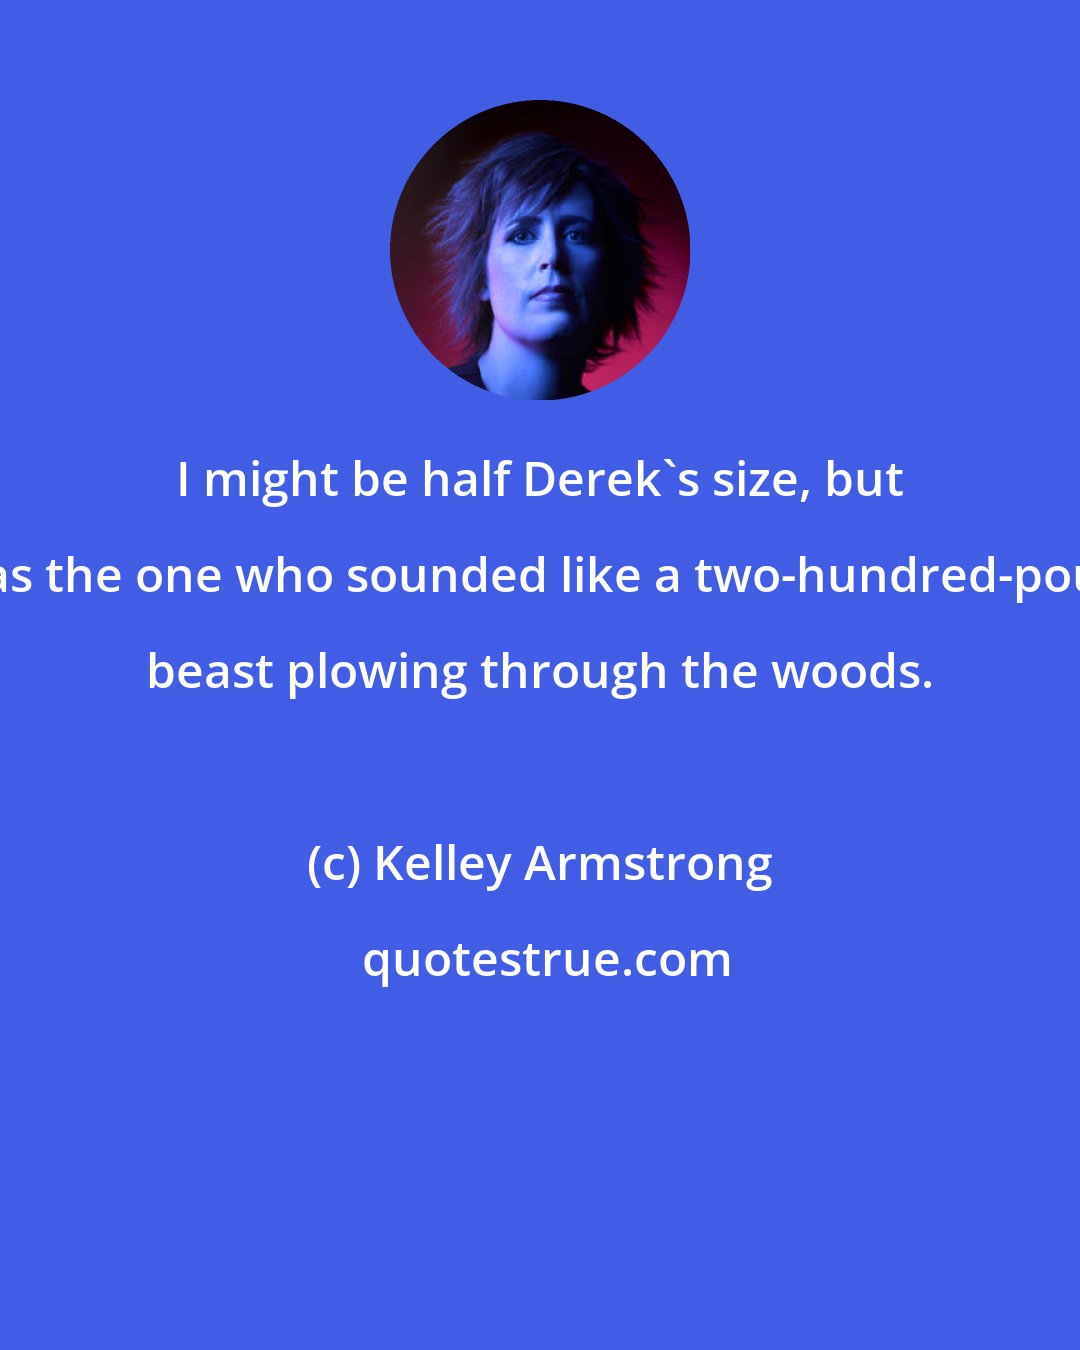 Kelley Armstrong: I might be half Derek's size, but I was the one who sounded like a two-hundred-pound beast plowing through the woods.